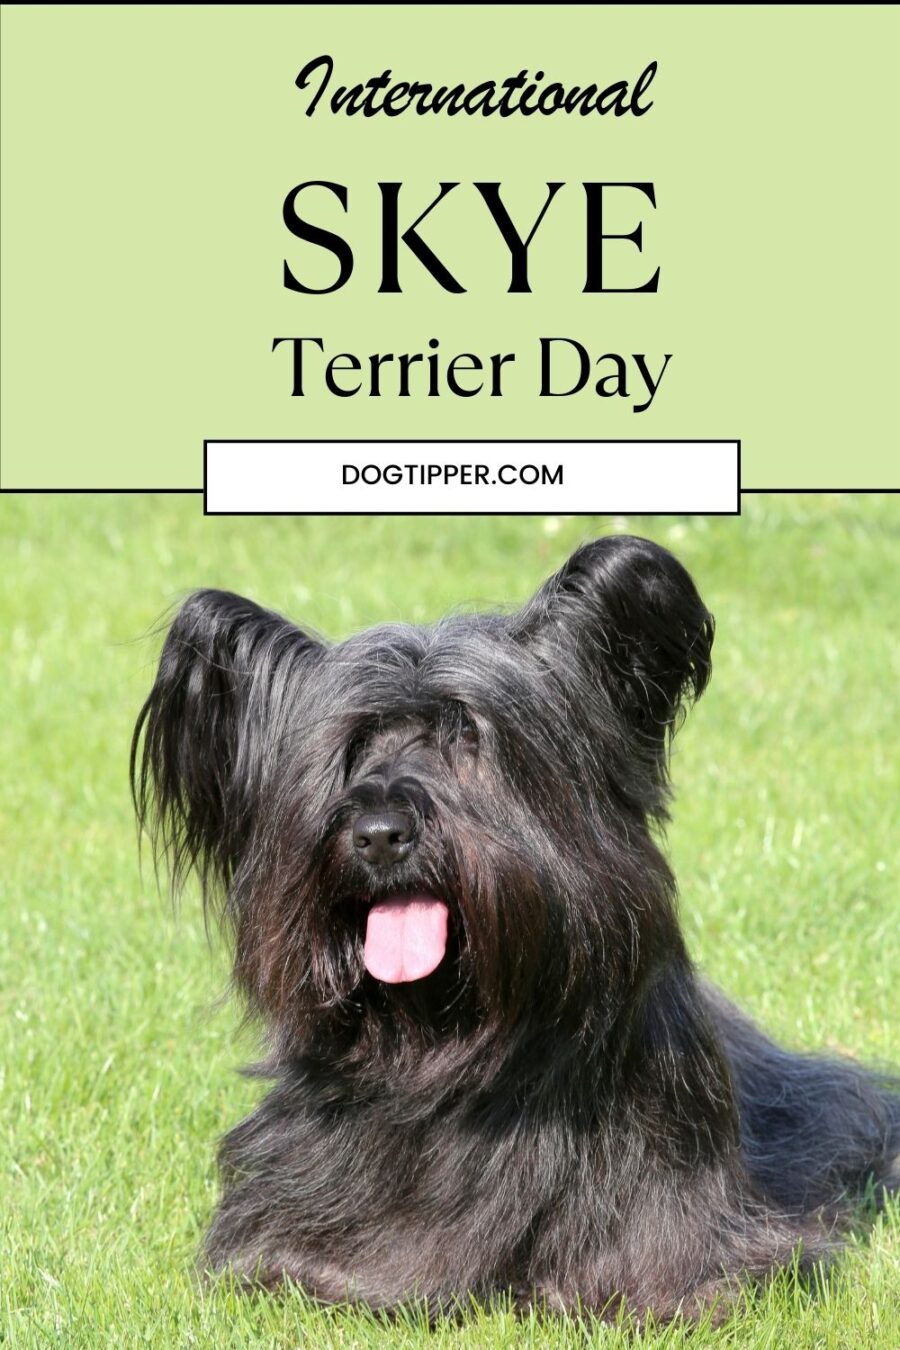 Black Skye Terrier on a green grass lawn with the words International Skye Terrier Day at the top of the image